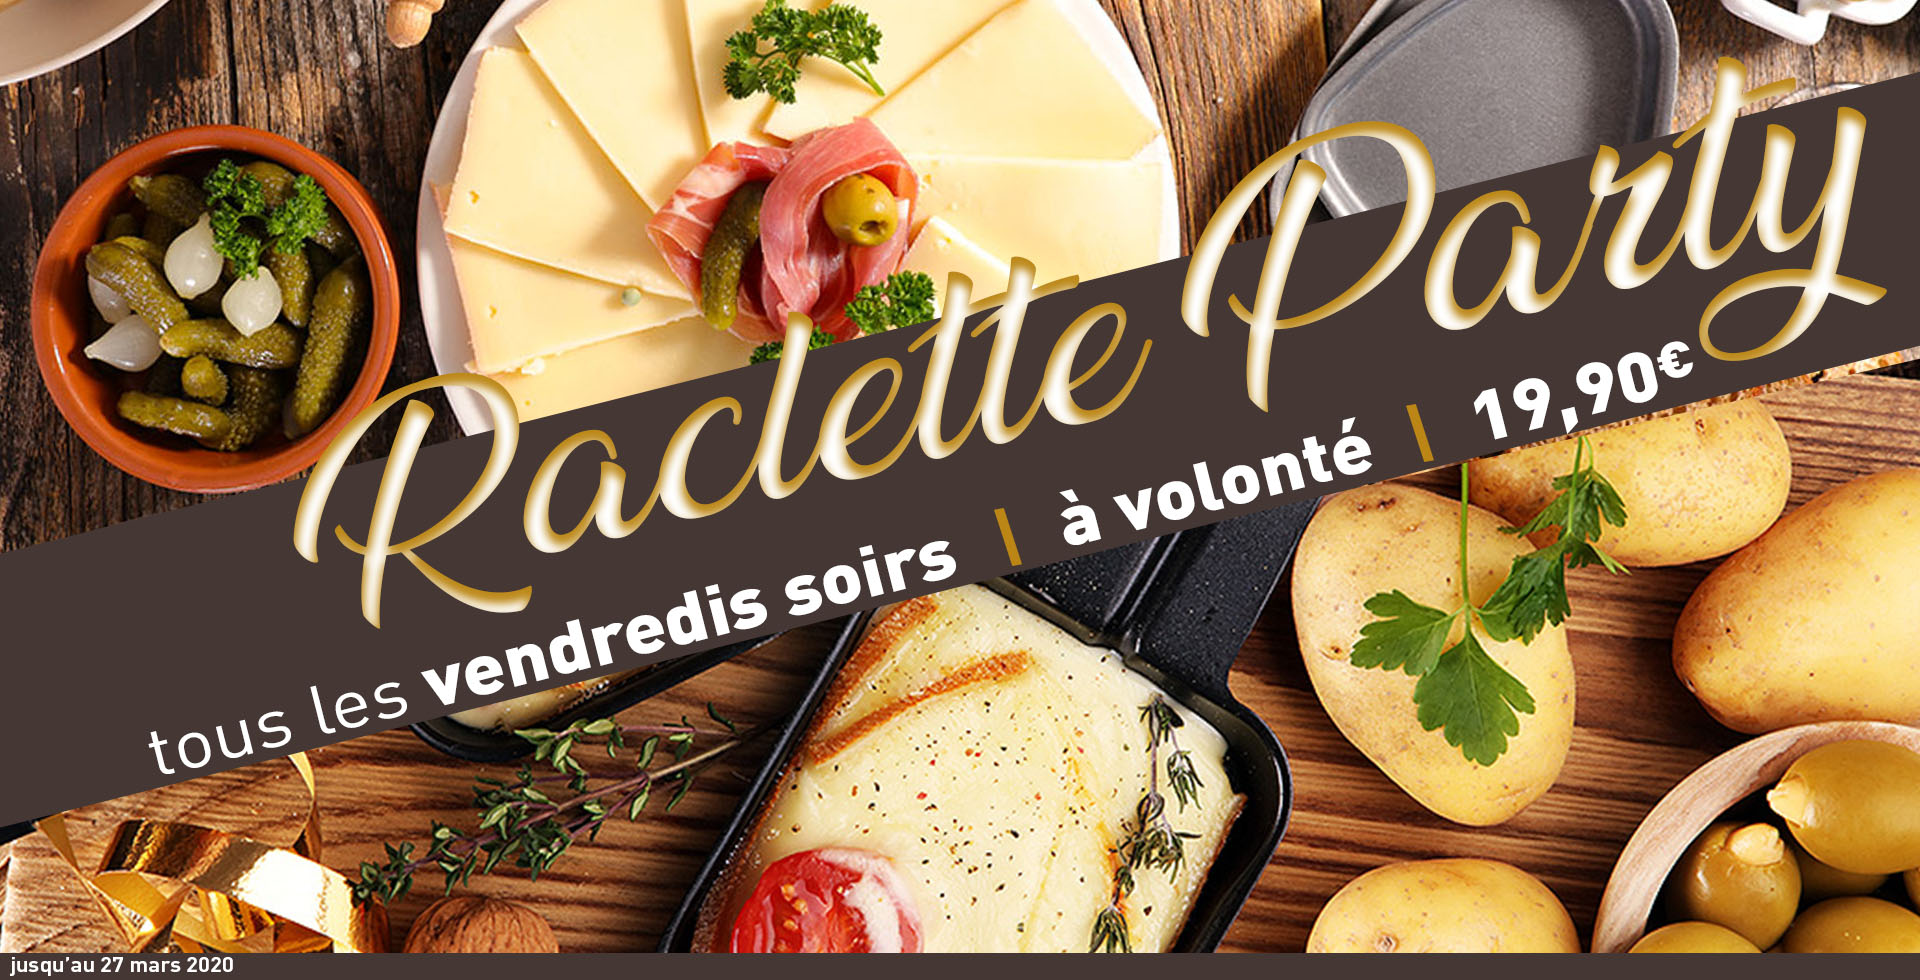 RACLETTE PARTY